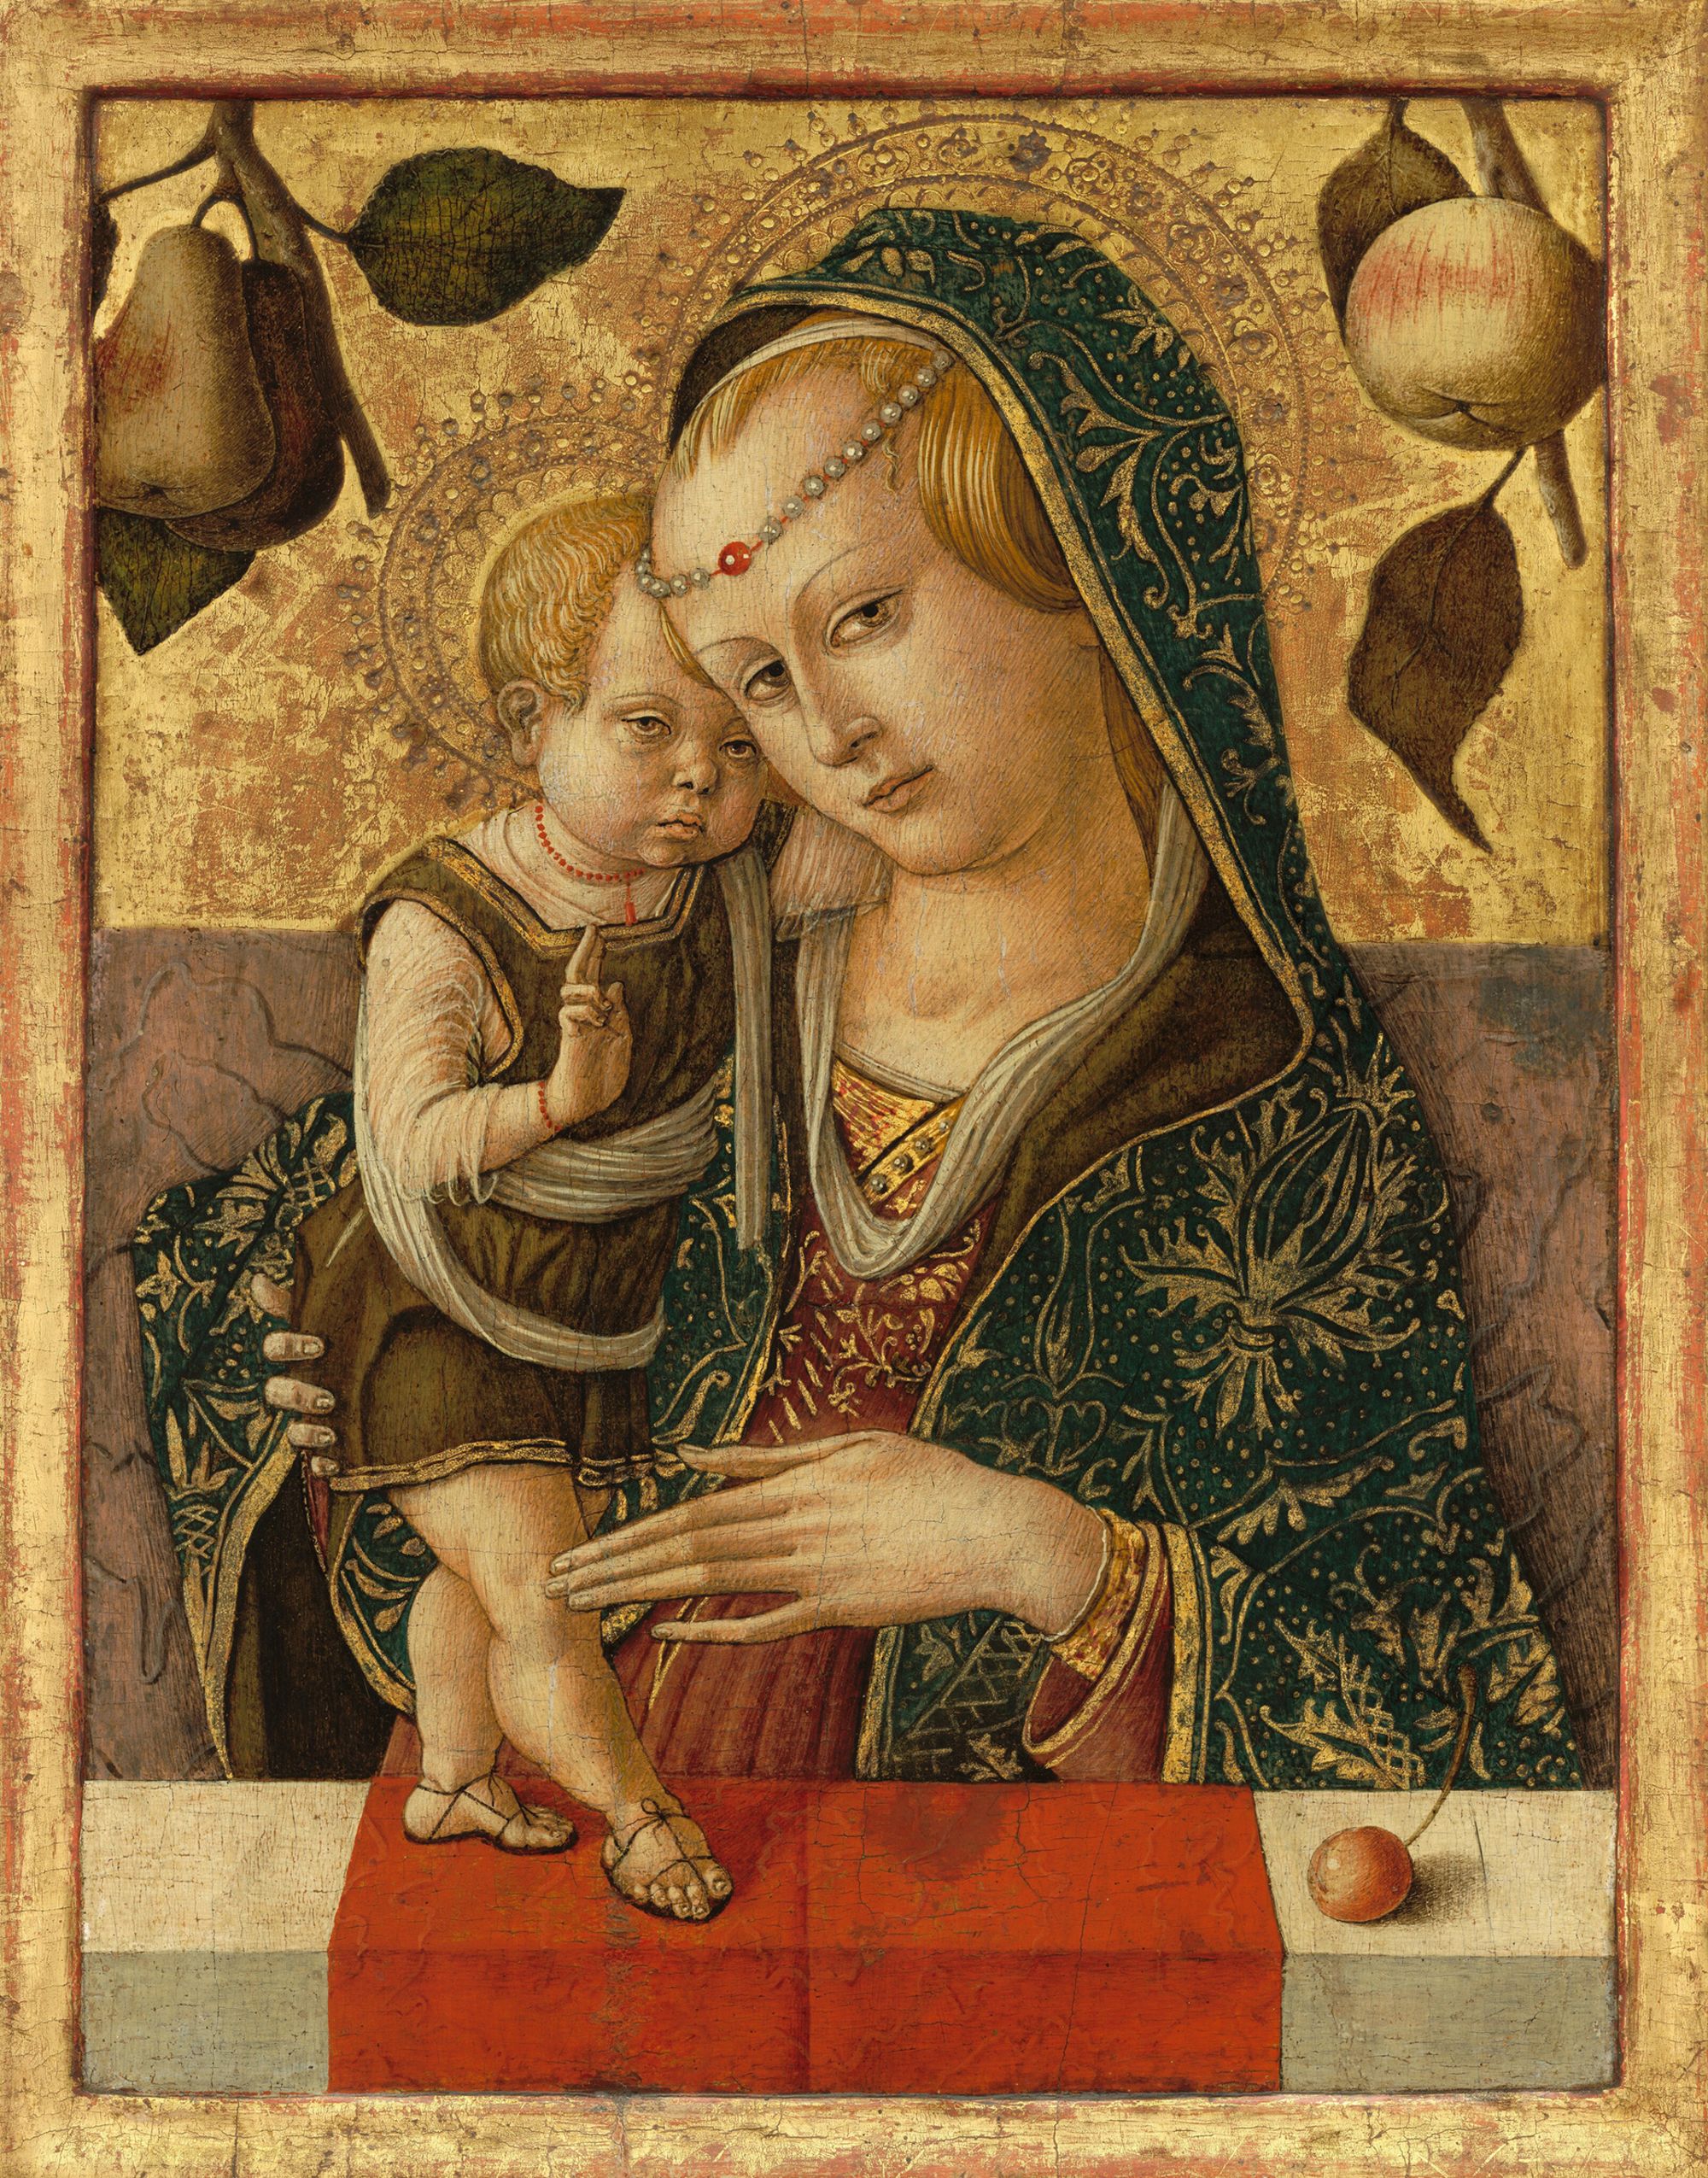 Carlo Crivelli's "Madonna and Child," painted circa 1490.